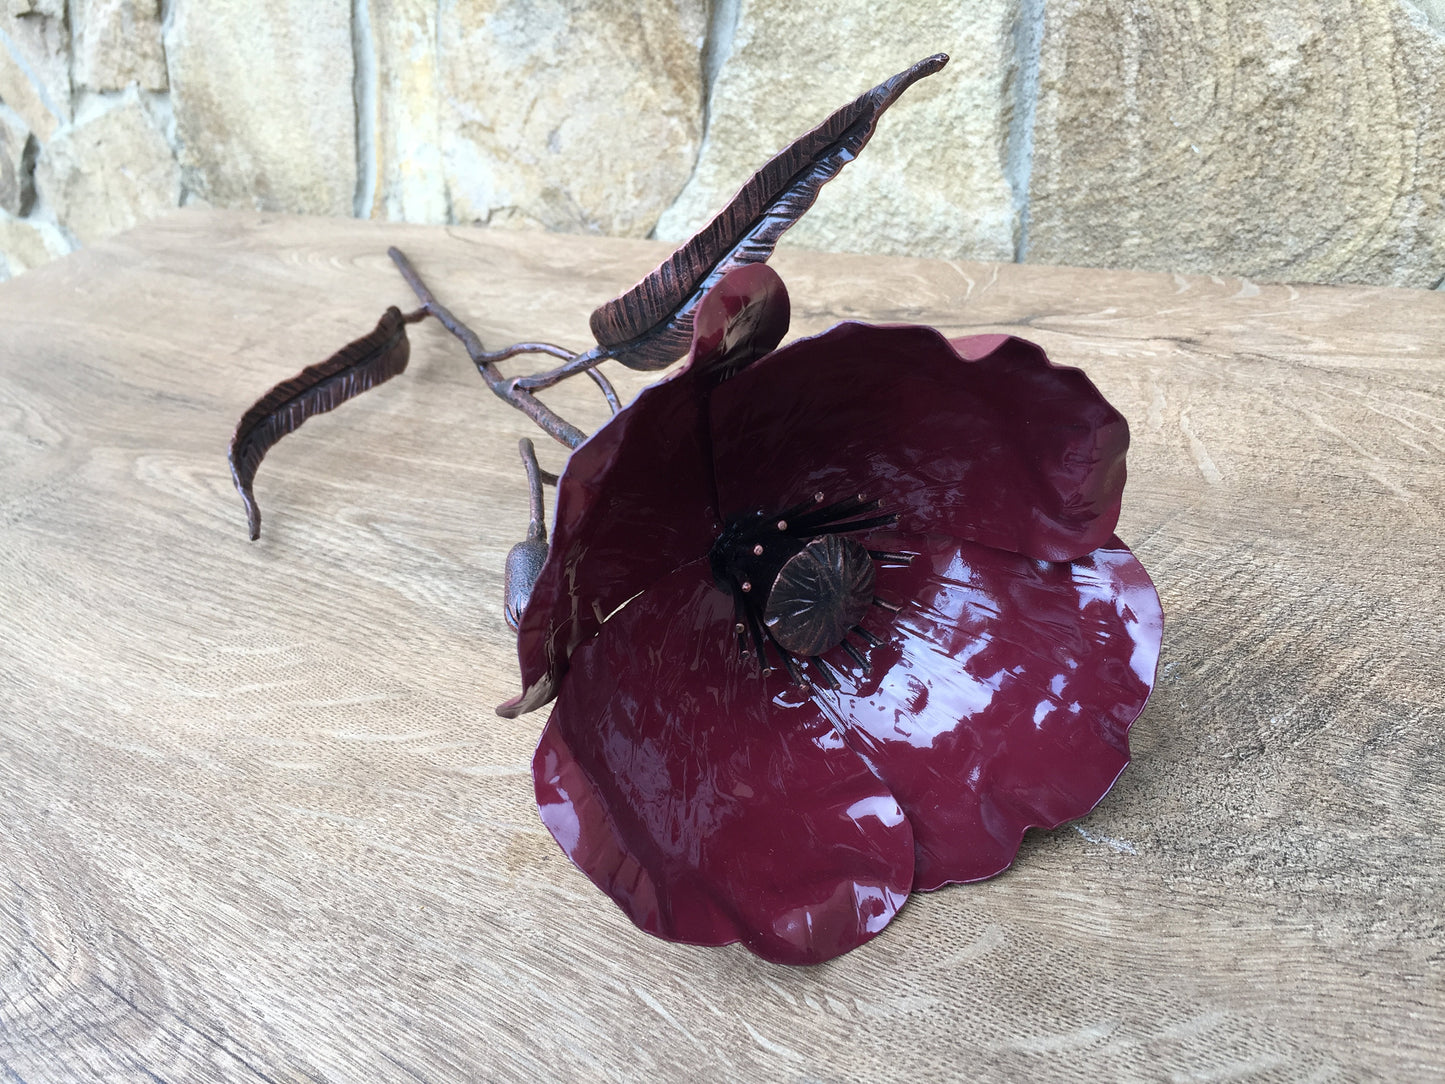 Hand forged poppy, bridesmaid gifts, gift for bride, bridesmaid gift, bride gift, brides gift, bachelorette party, gift for bridsmaid, poppy